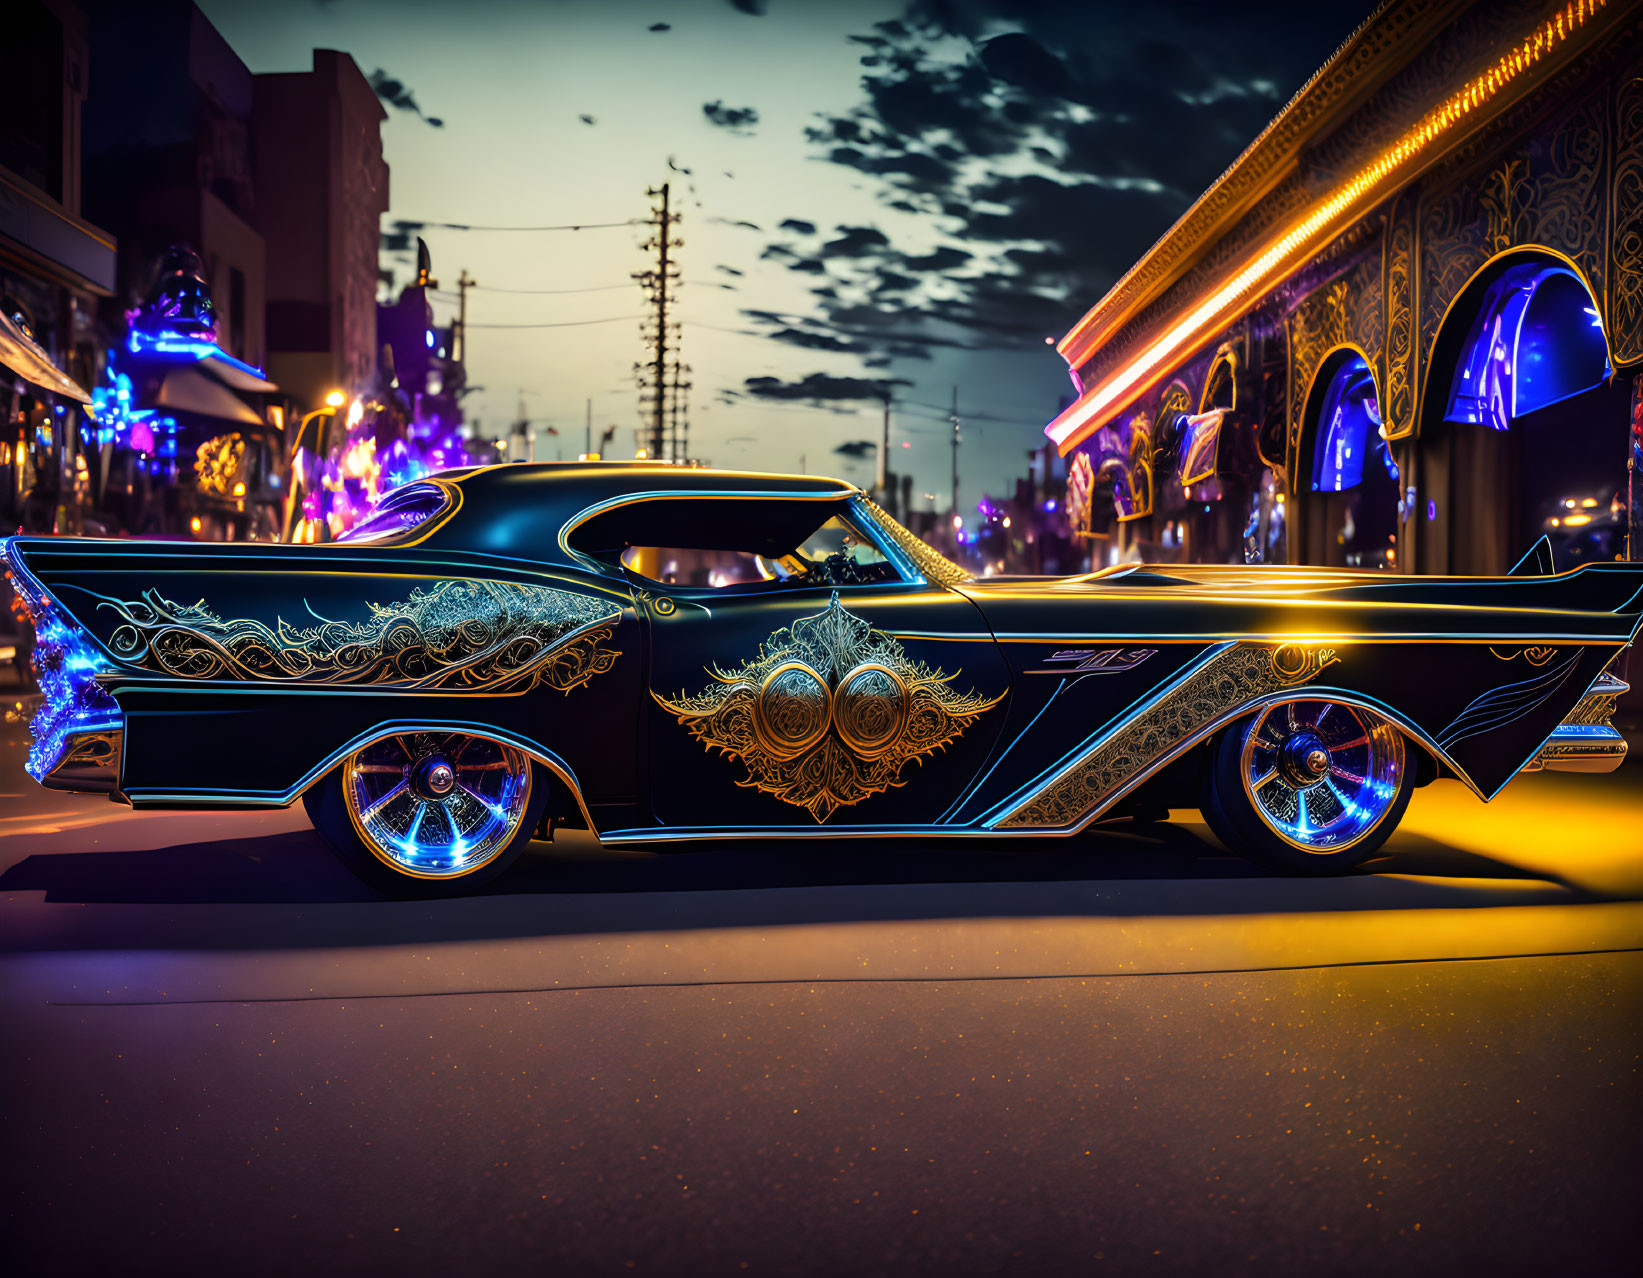 Vintage car with neon underglow and intricate patterns in city street at night